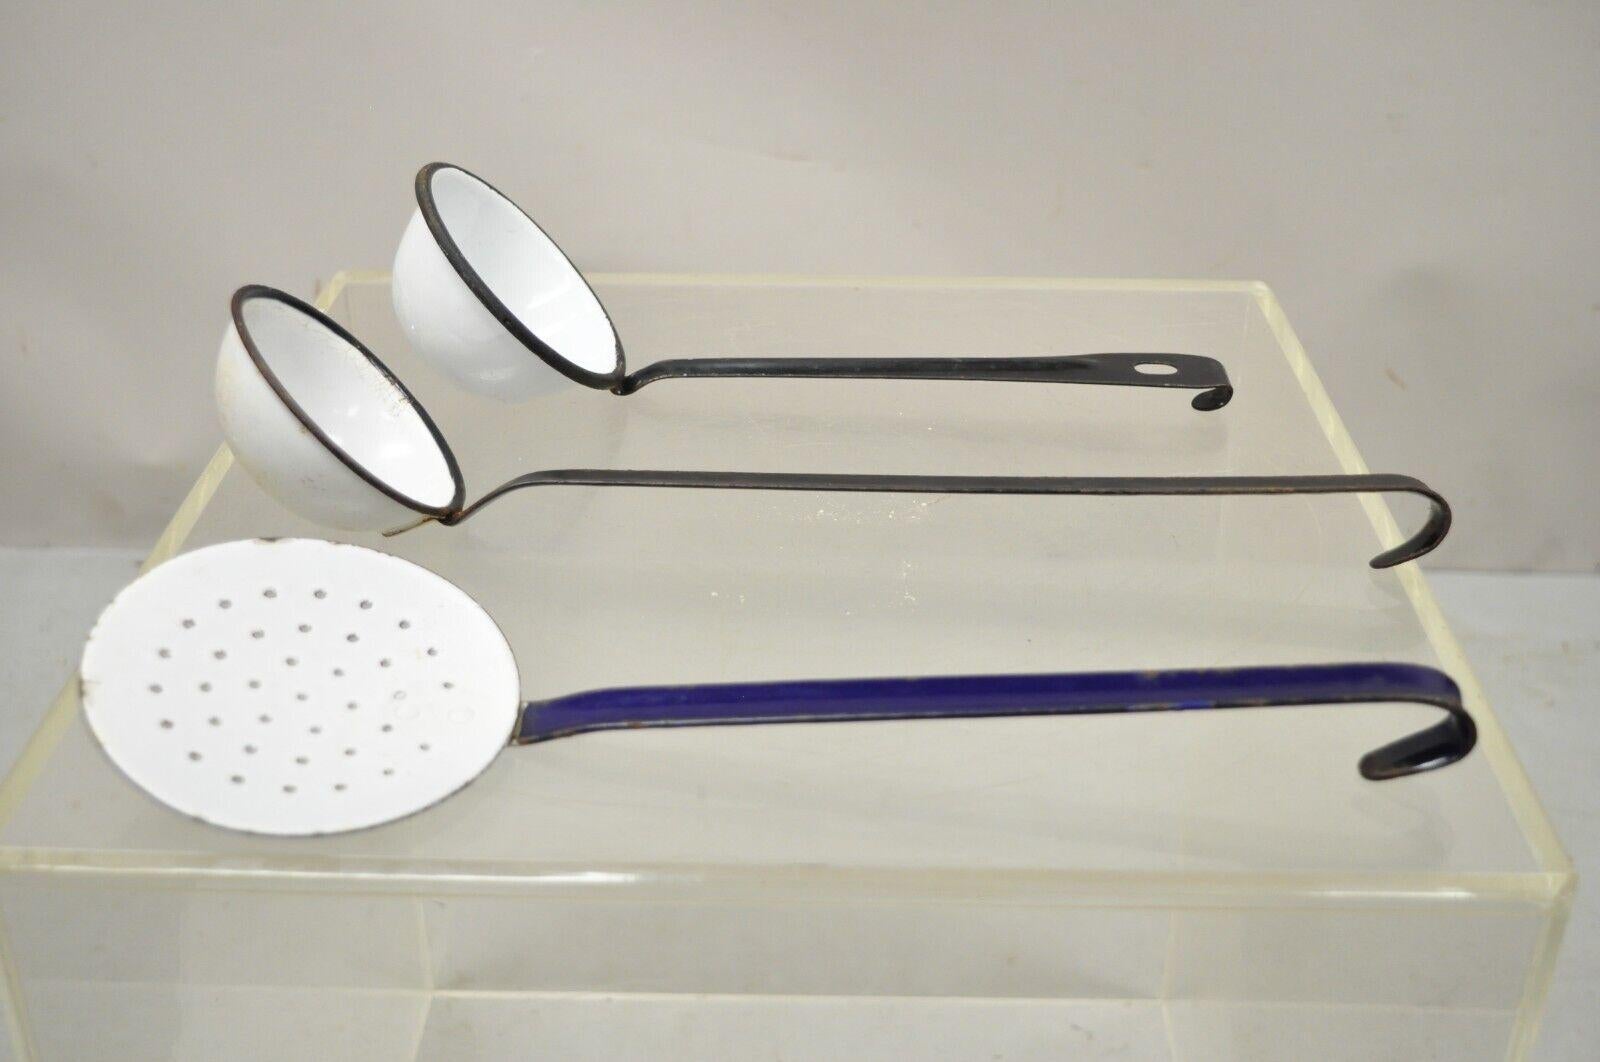 White black blue porcelain enamel French County water dipper ladles - 3 pieces. Item features (2) black and white ladles, (1) strainer, very nice antique pieces. early 20th century.
Measurements: 
Large: 15